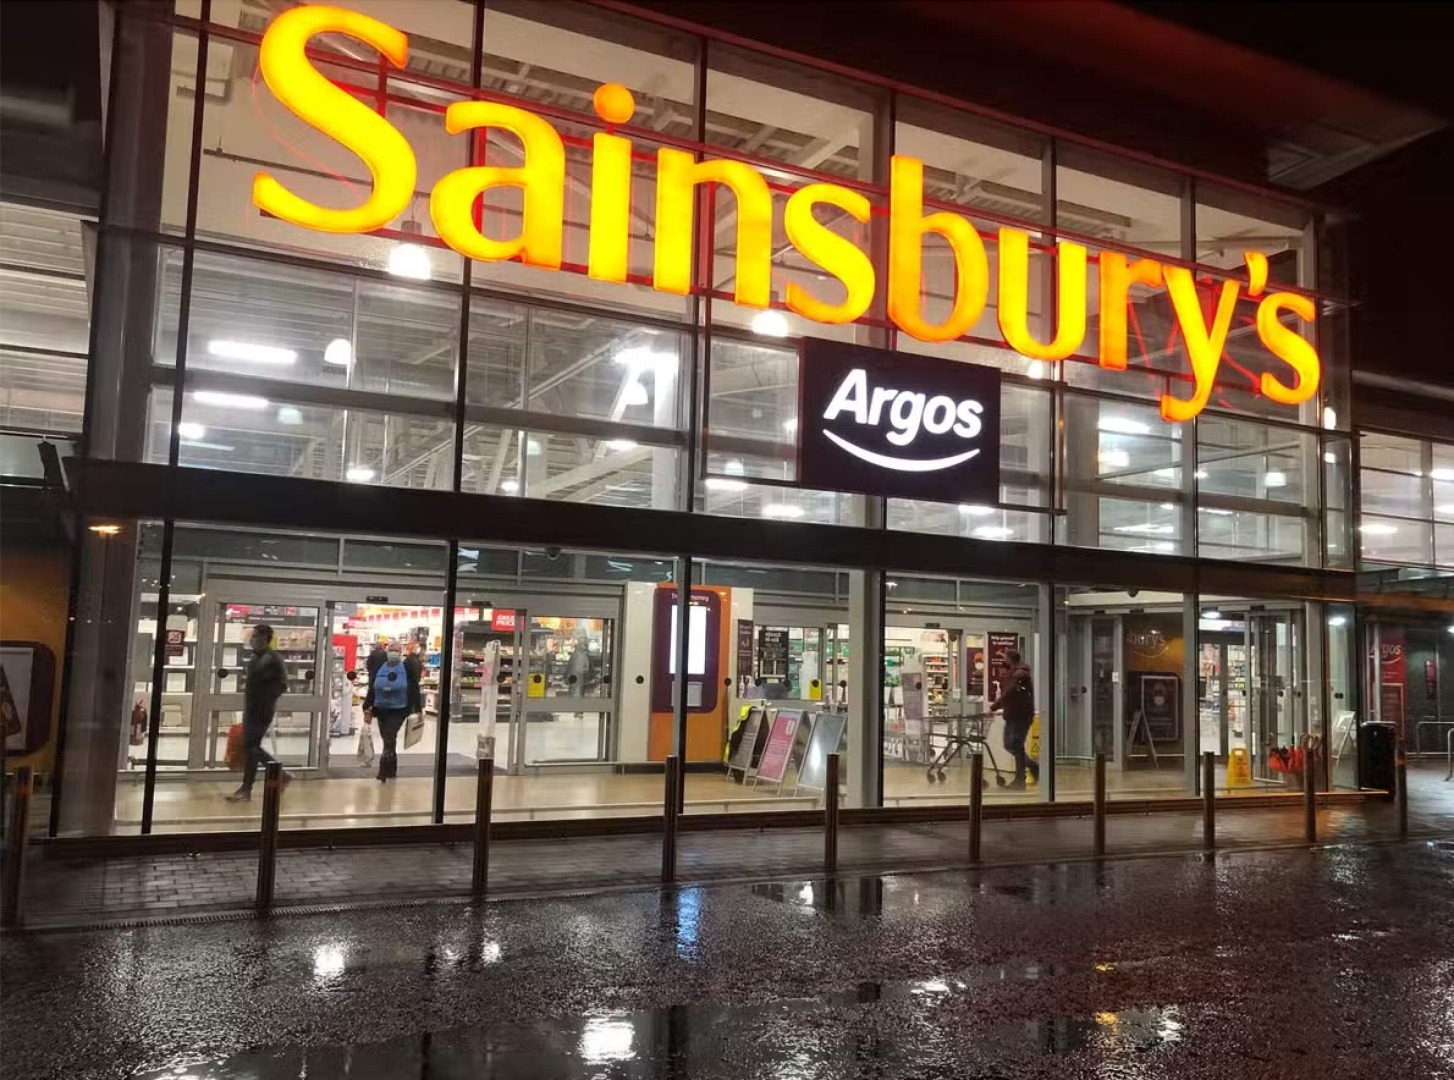 Sainsbury's to Close Argos Depots and Habitat Showrooms, Affecting Over 1,400 Jobs